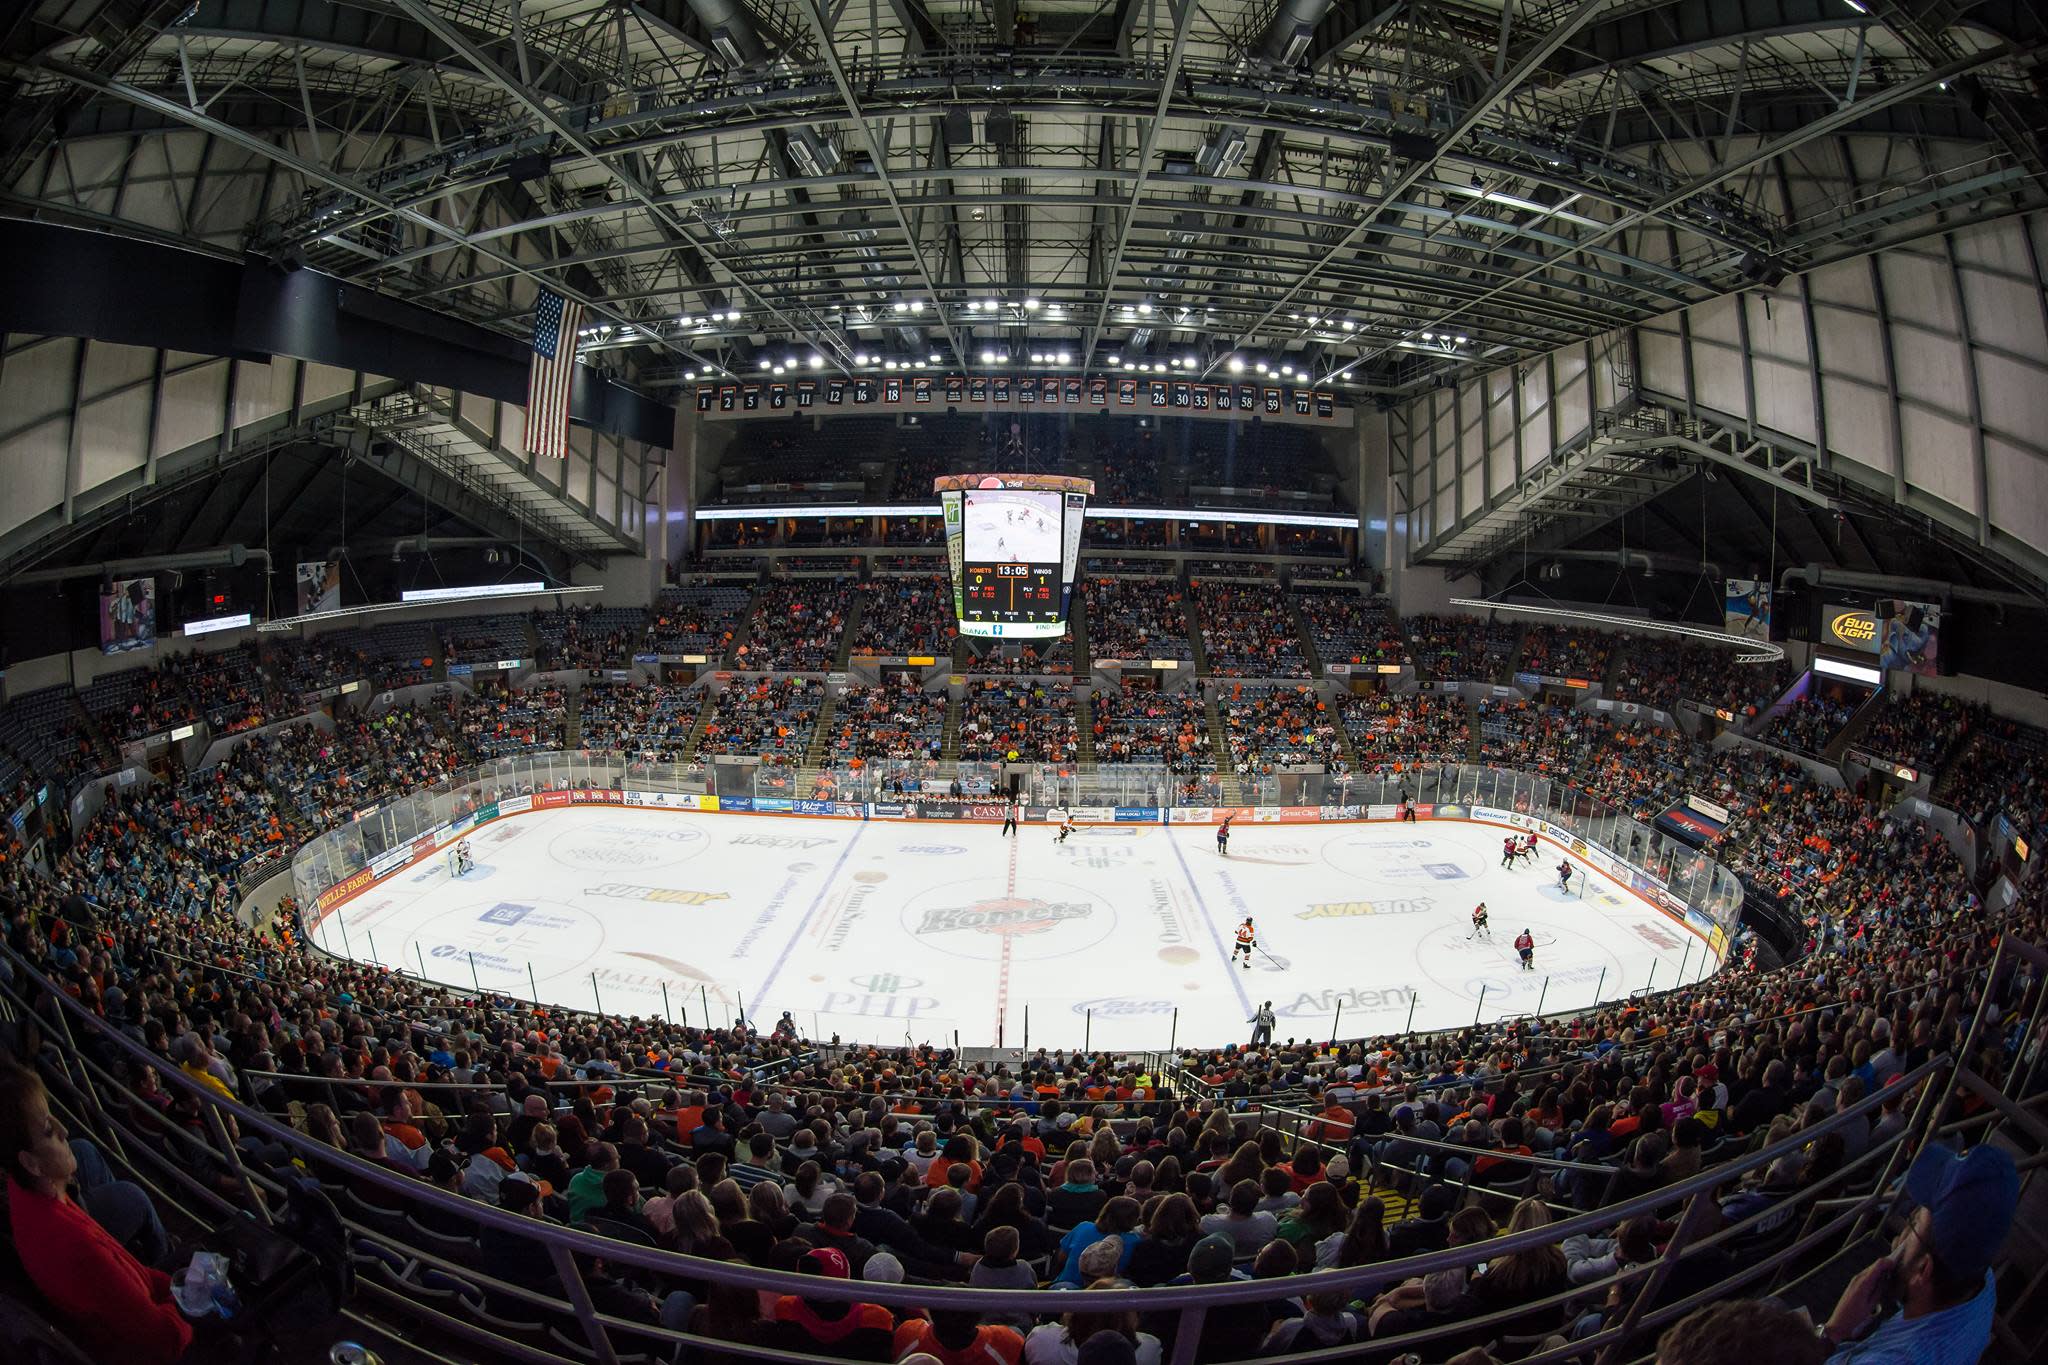 The arena at the Allen County War Memorial Coliseum comes to life when the Komets are in town!